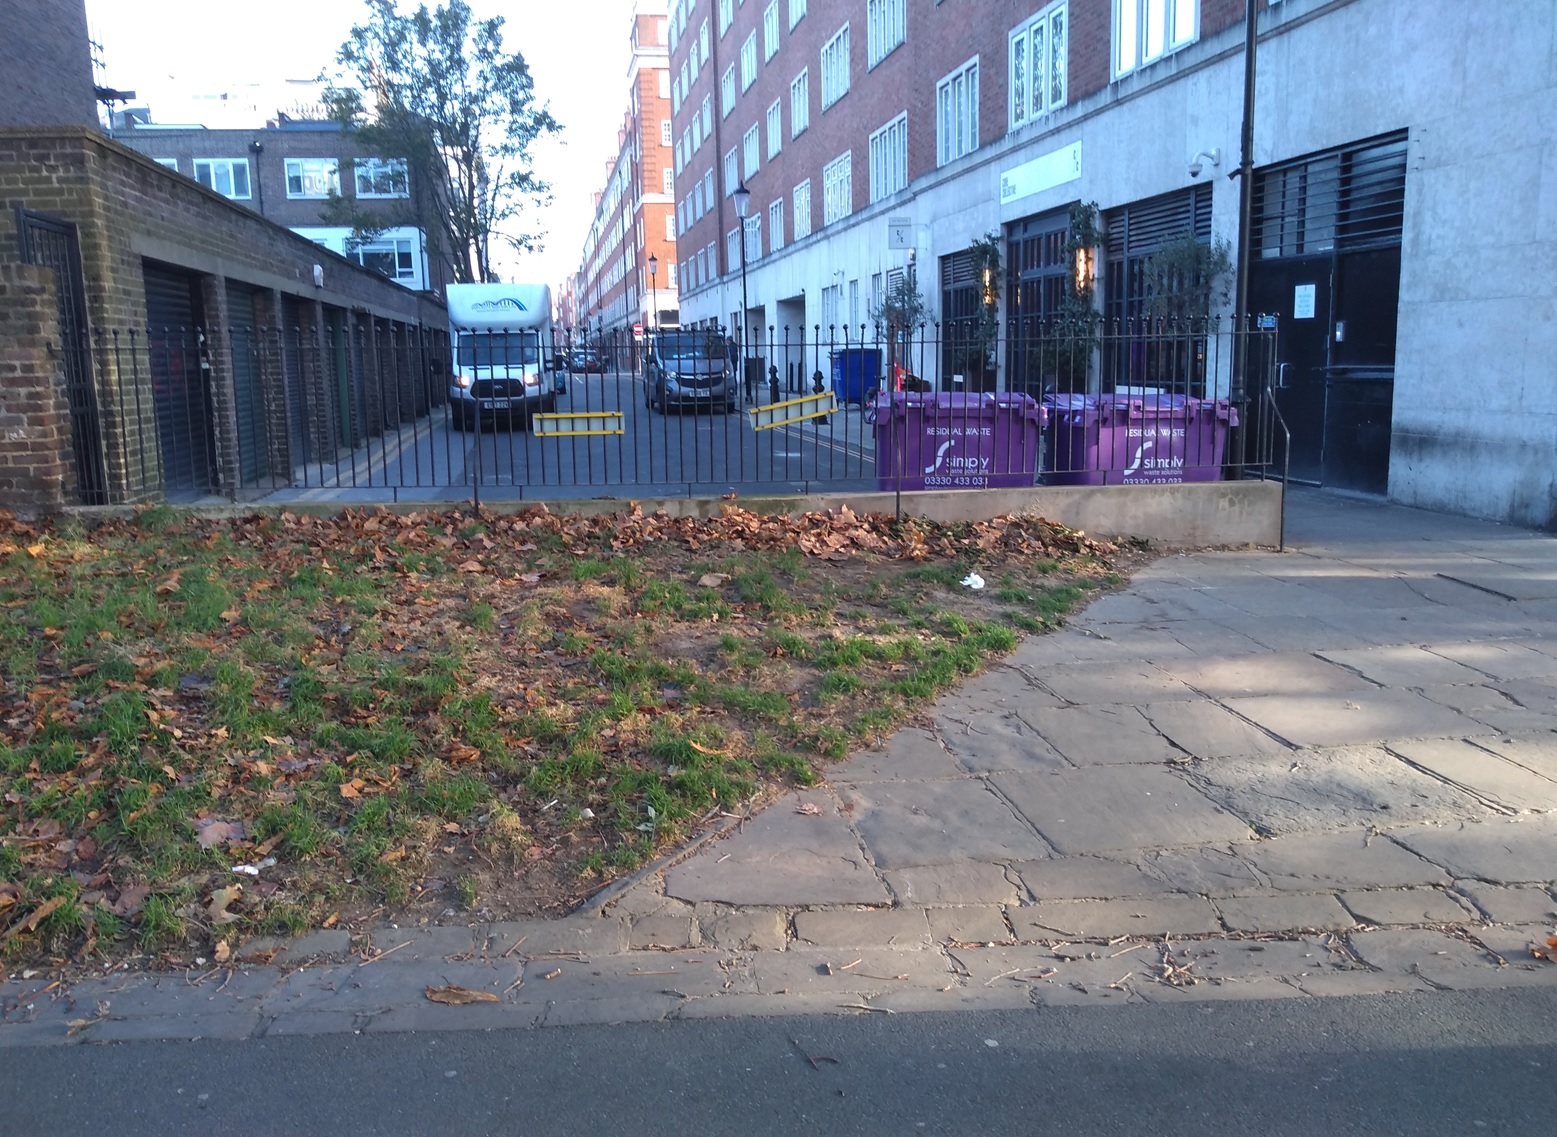 An image of the section of wall separating Phillimore Walk from Holland Walk. In front of the wall is a small section of grass and paving. Behind the wall is Phillimore Walk, buildings and large purple wheeled bins.